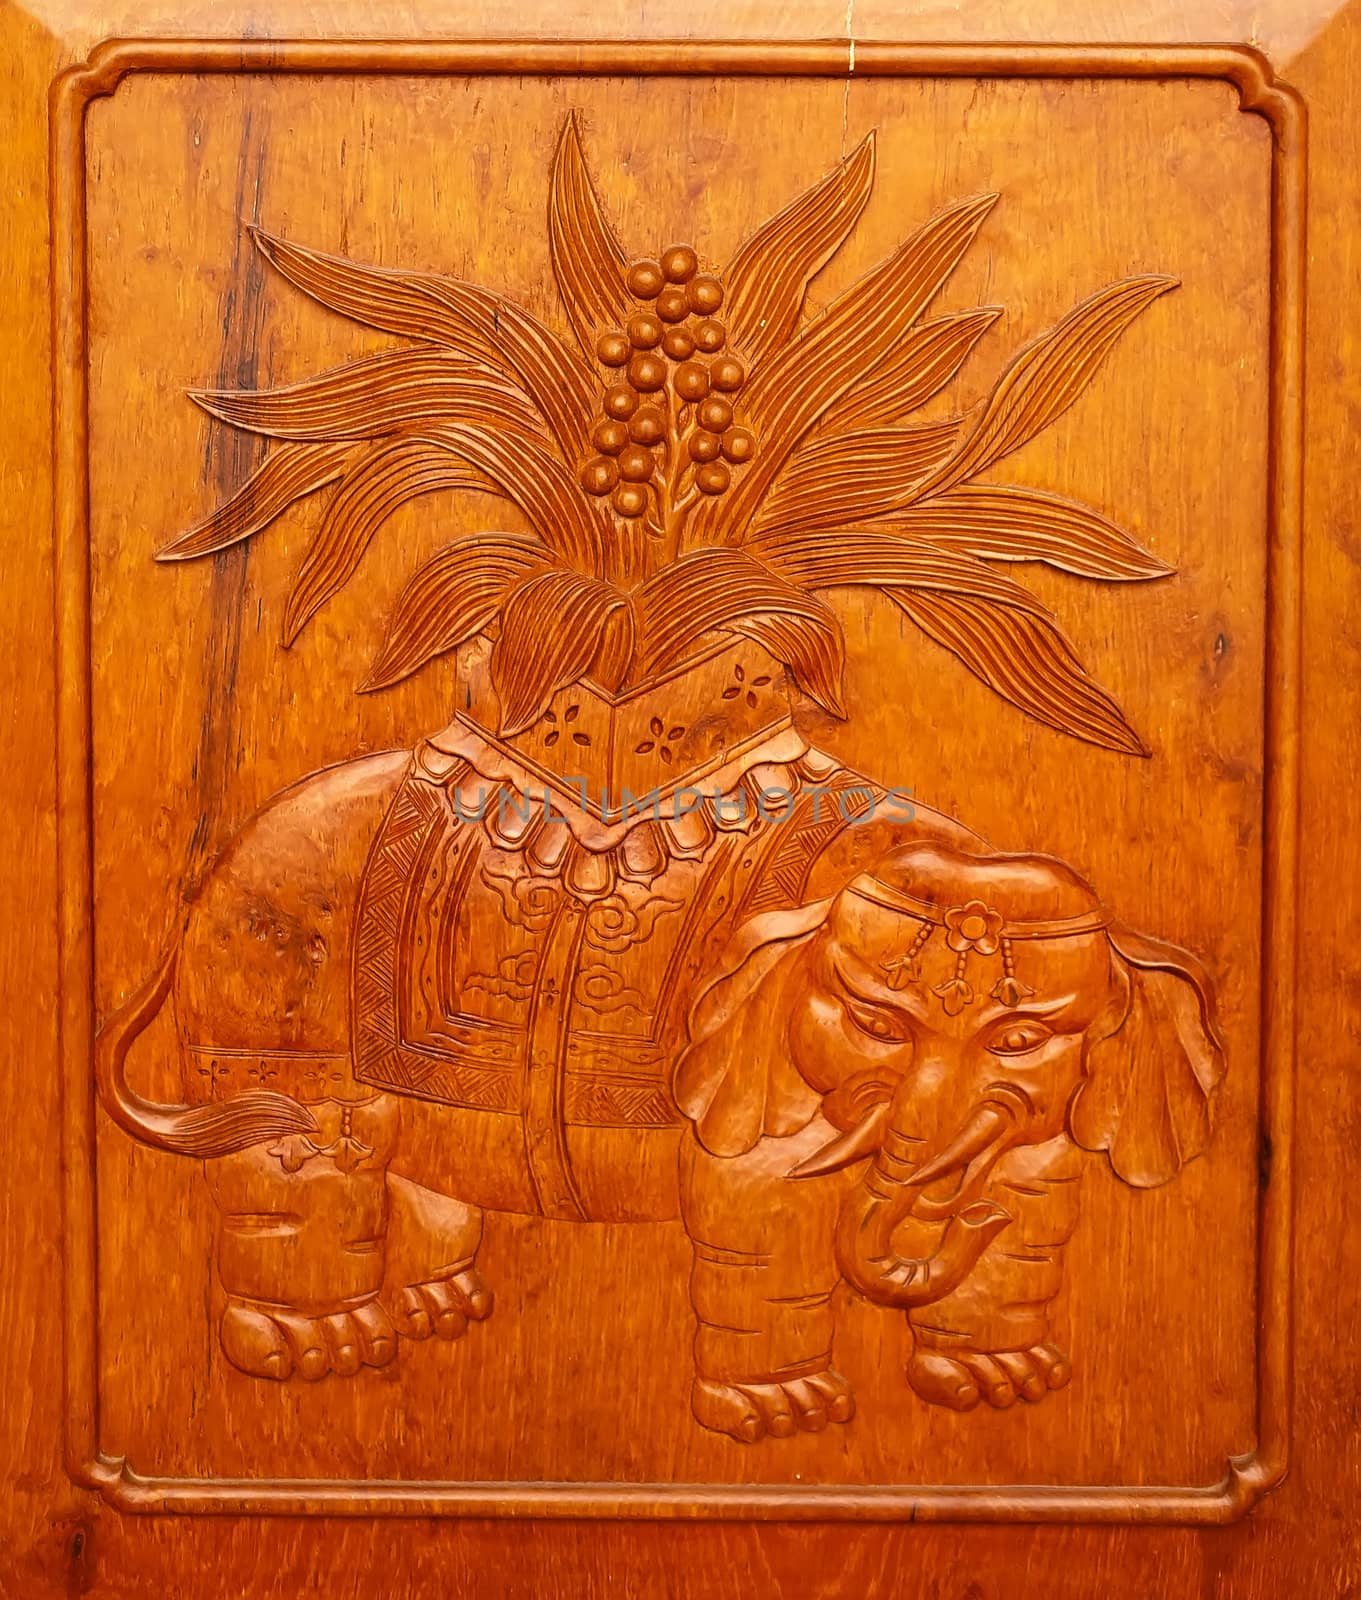 Wooden Elephant Panel Door Jing An Temple Shanghai China by bill_perry